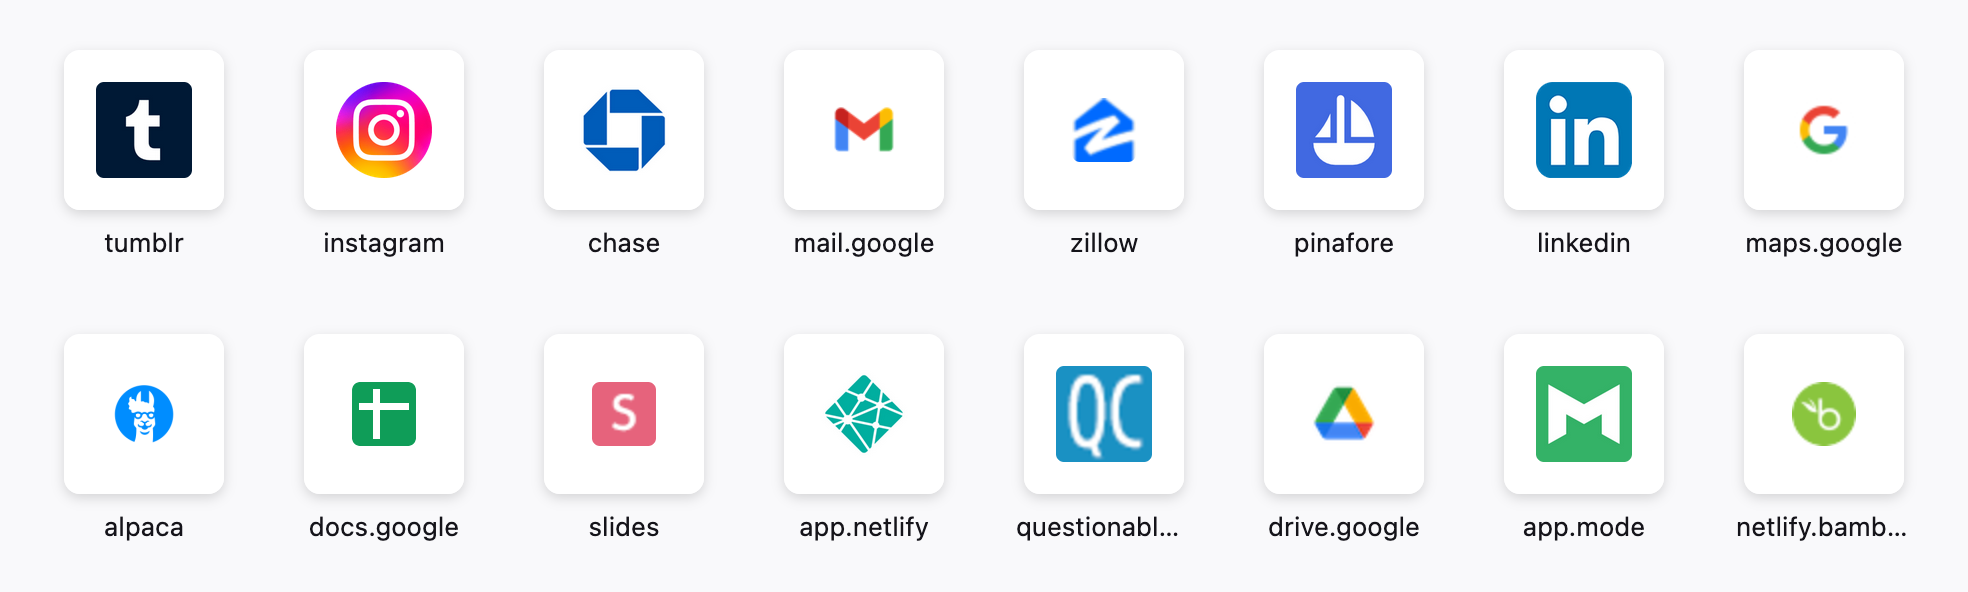 A grid of app icons, described in the table later in this article